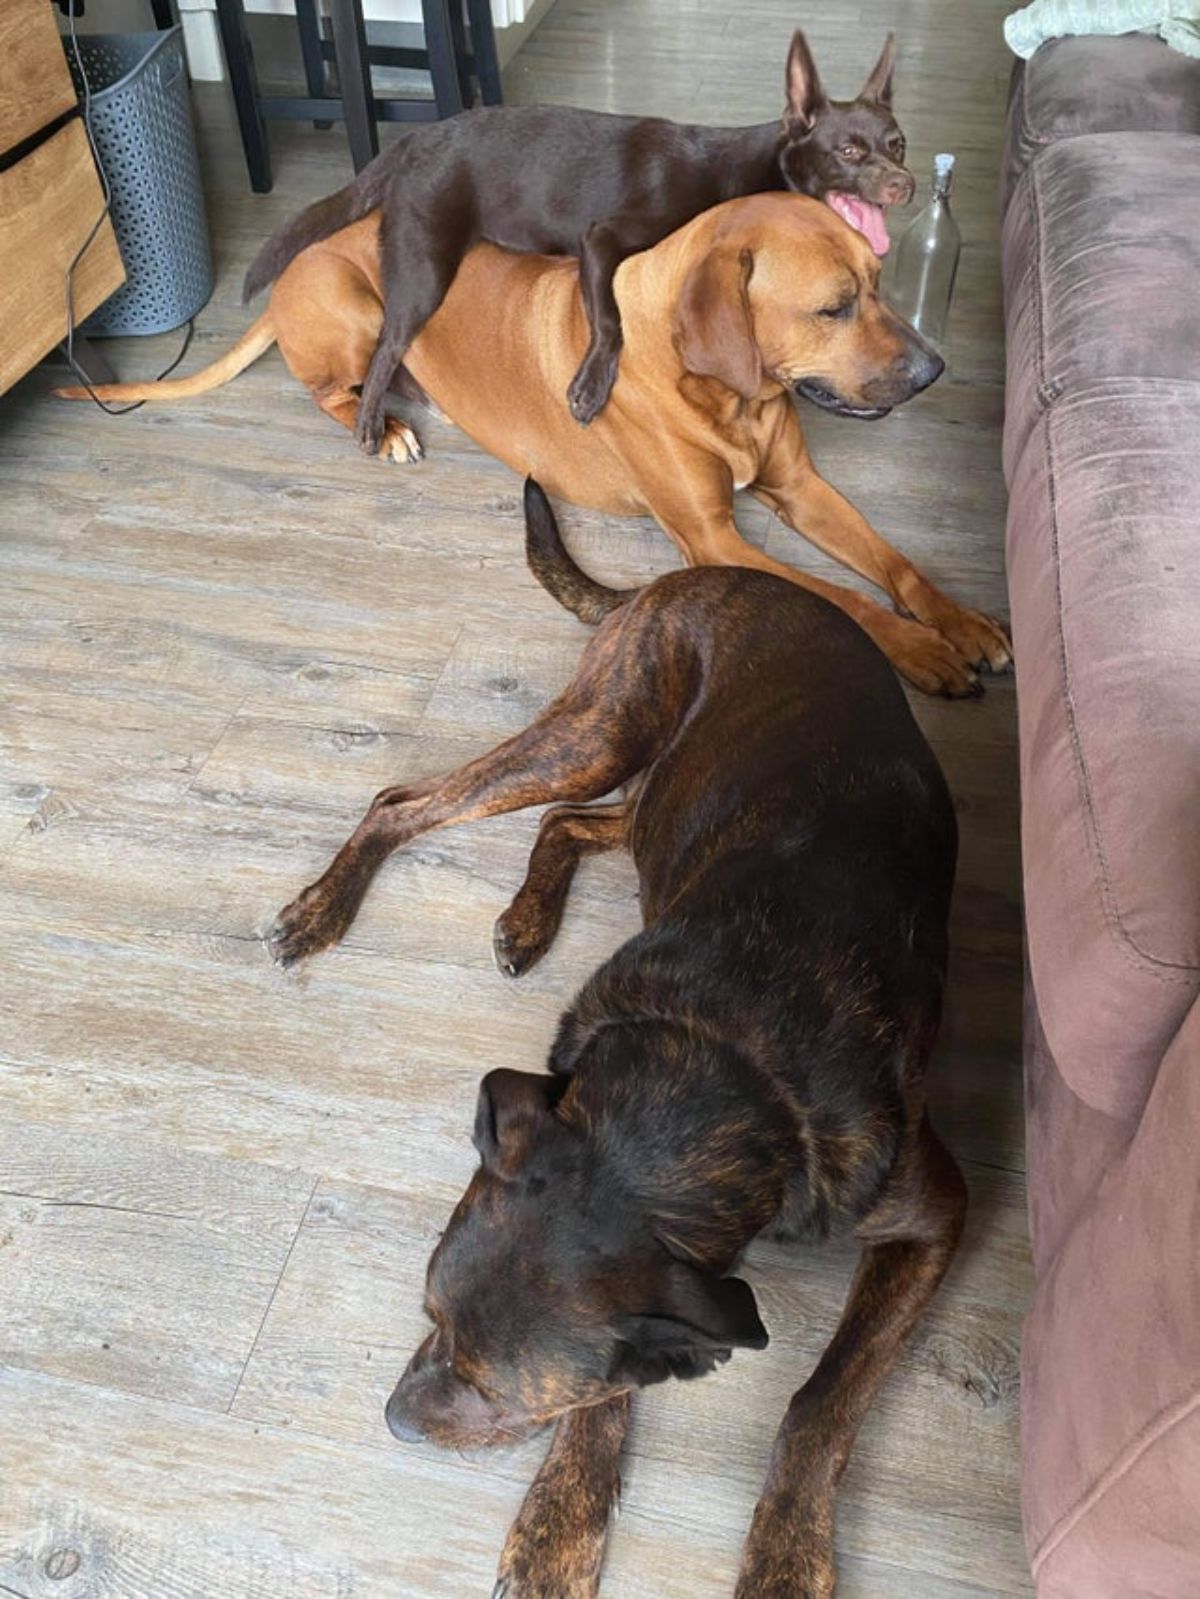 dark brown dog laying on a brown dog while another brown dog lays near them